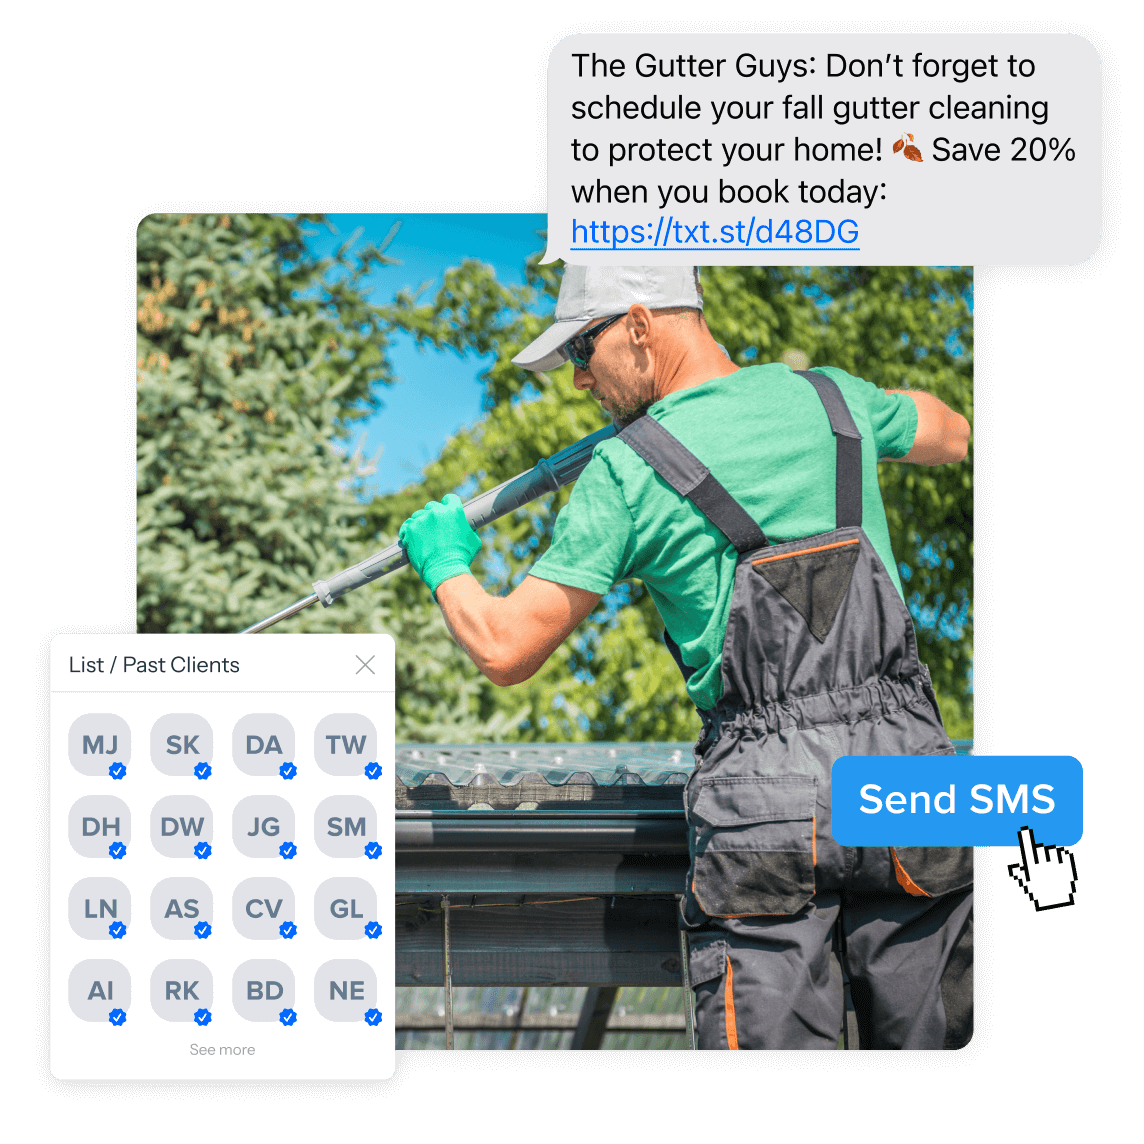 A worker cleaning gutters with a message box offering a discount for fall gutter cleaning services, exemplifying the use of mass texting to remind past clients and promote seasonal home maintenance services.